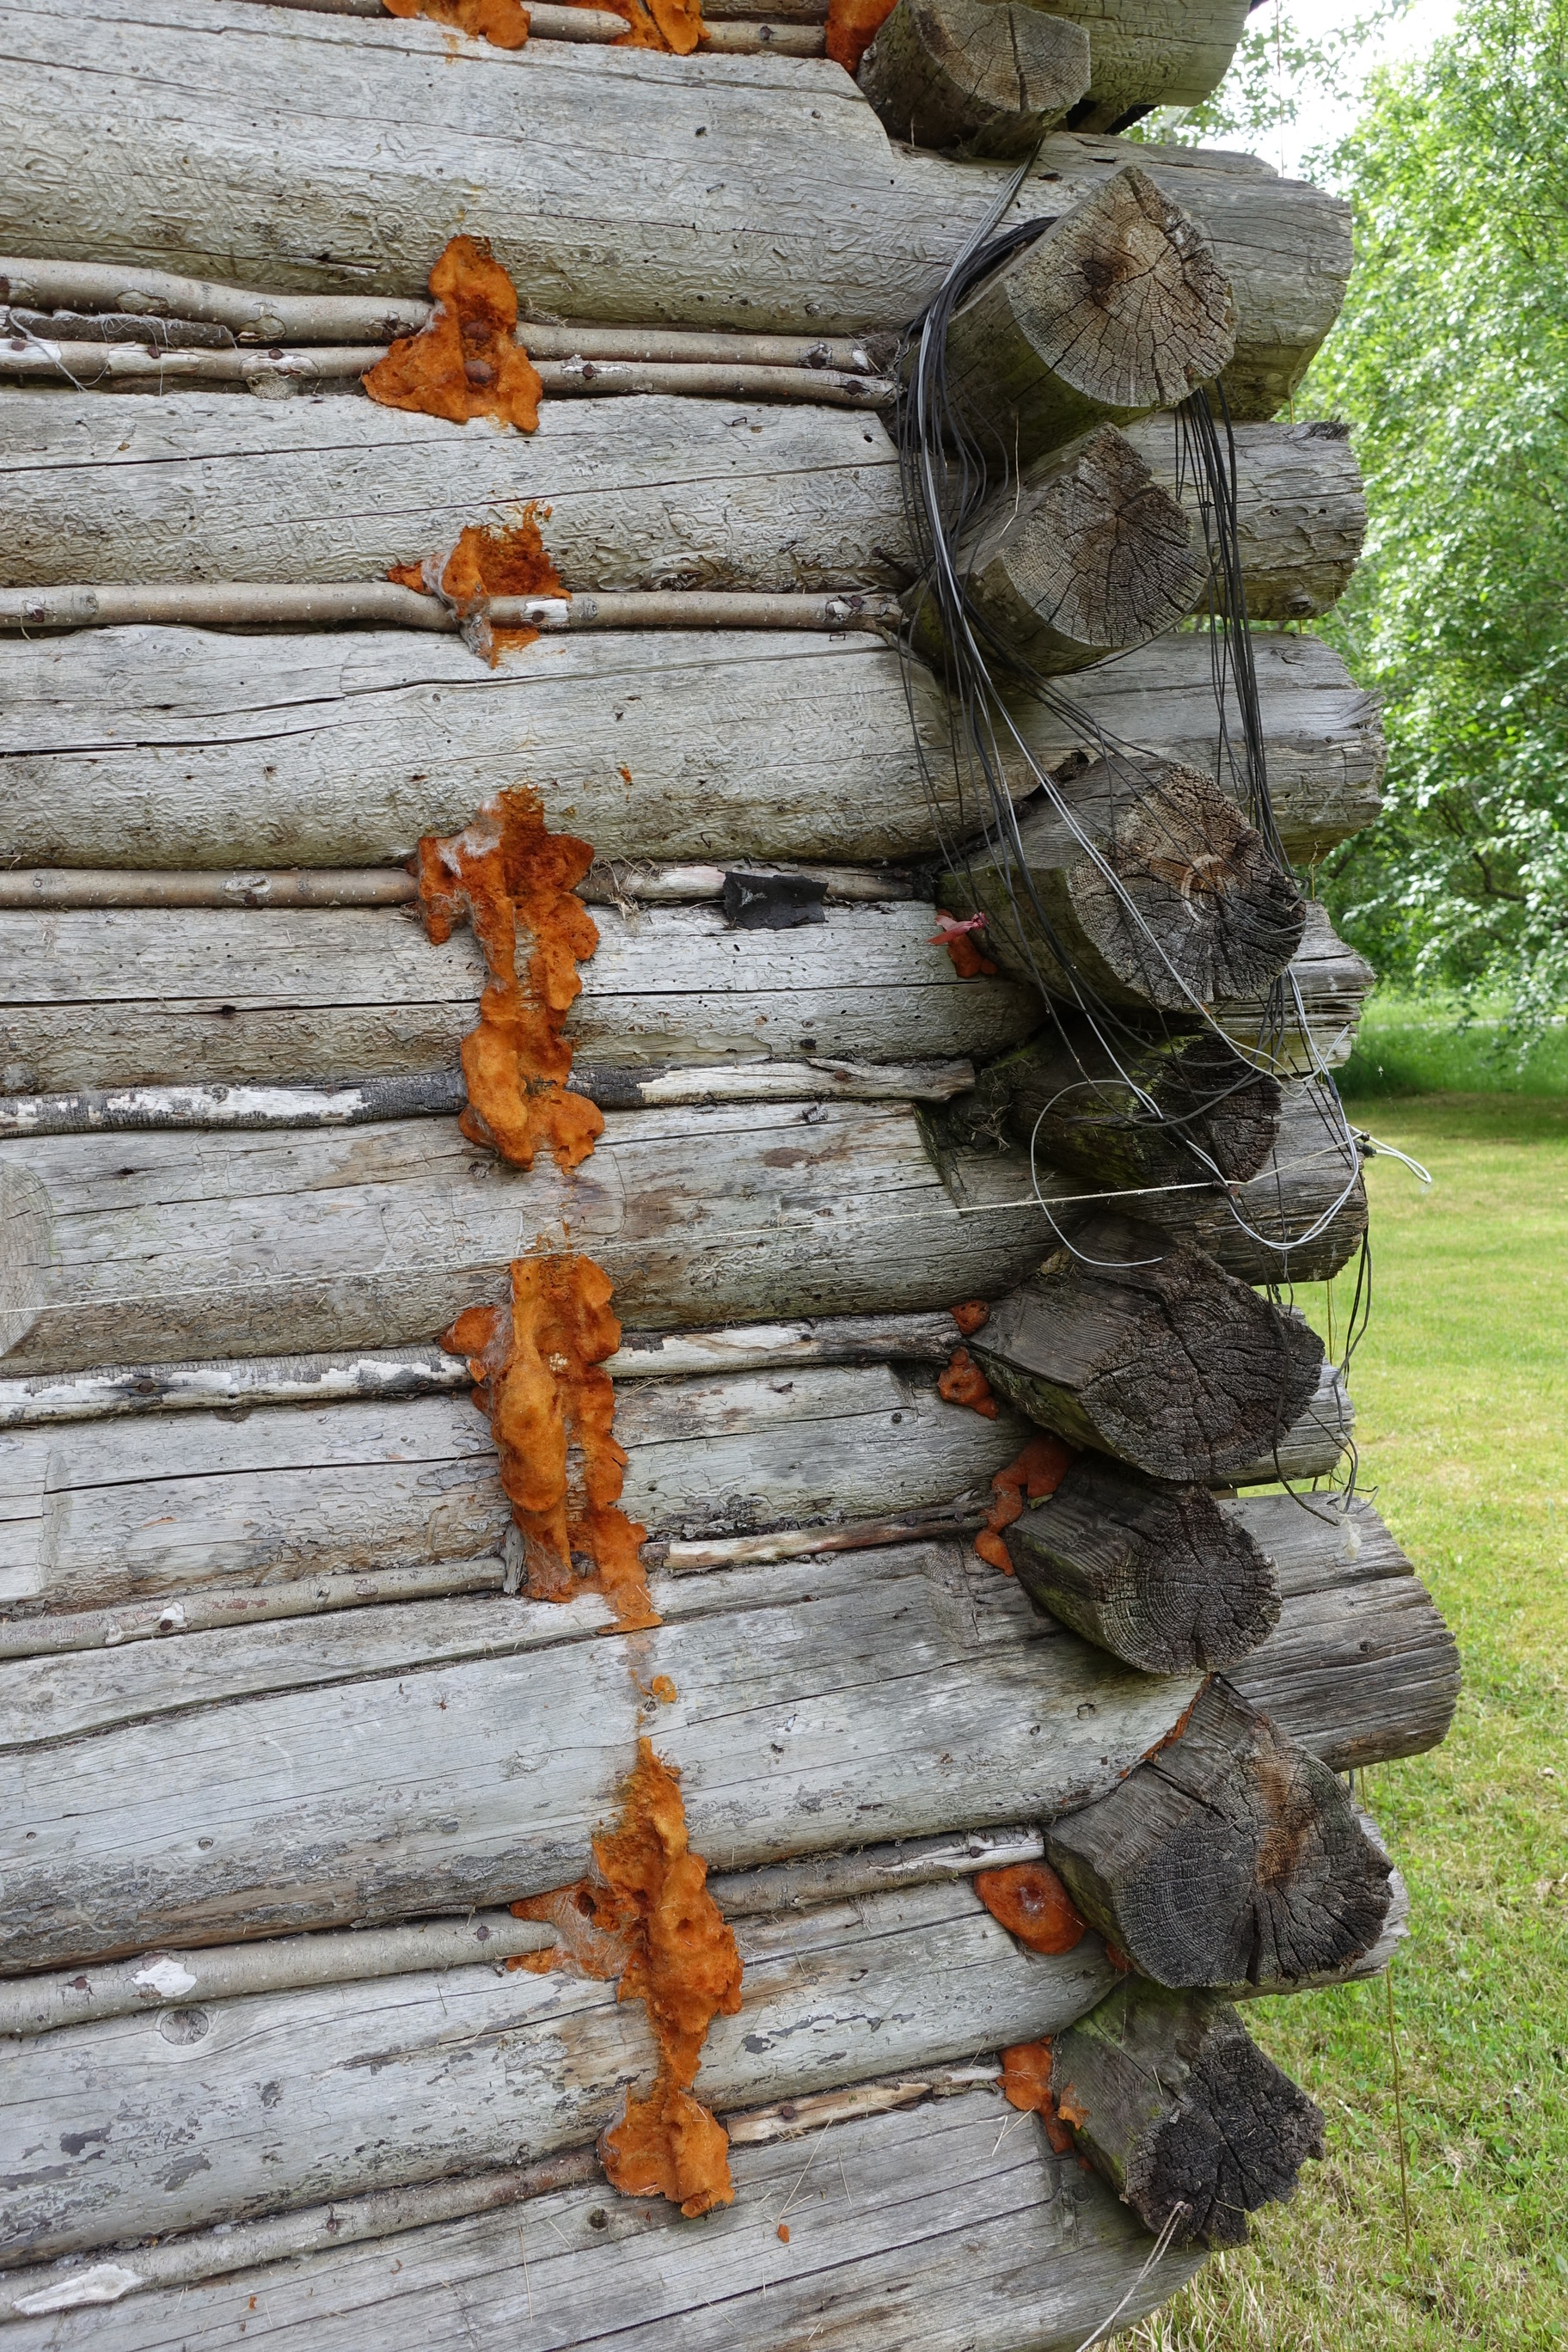 Detail shot of the McDermott Cabin, orange material is visible between the logs.